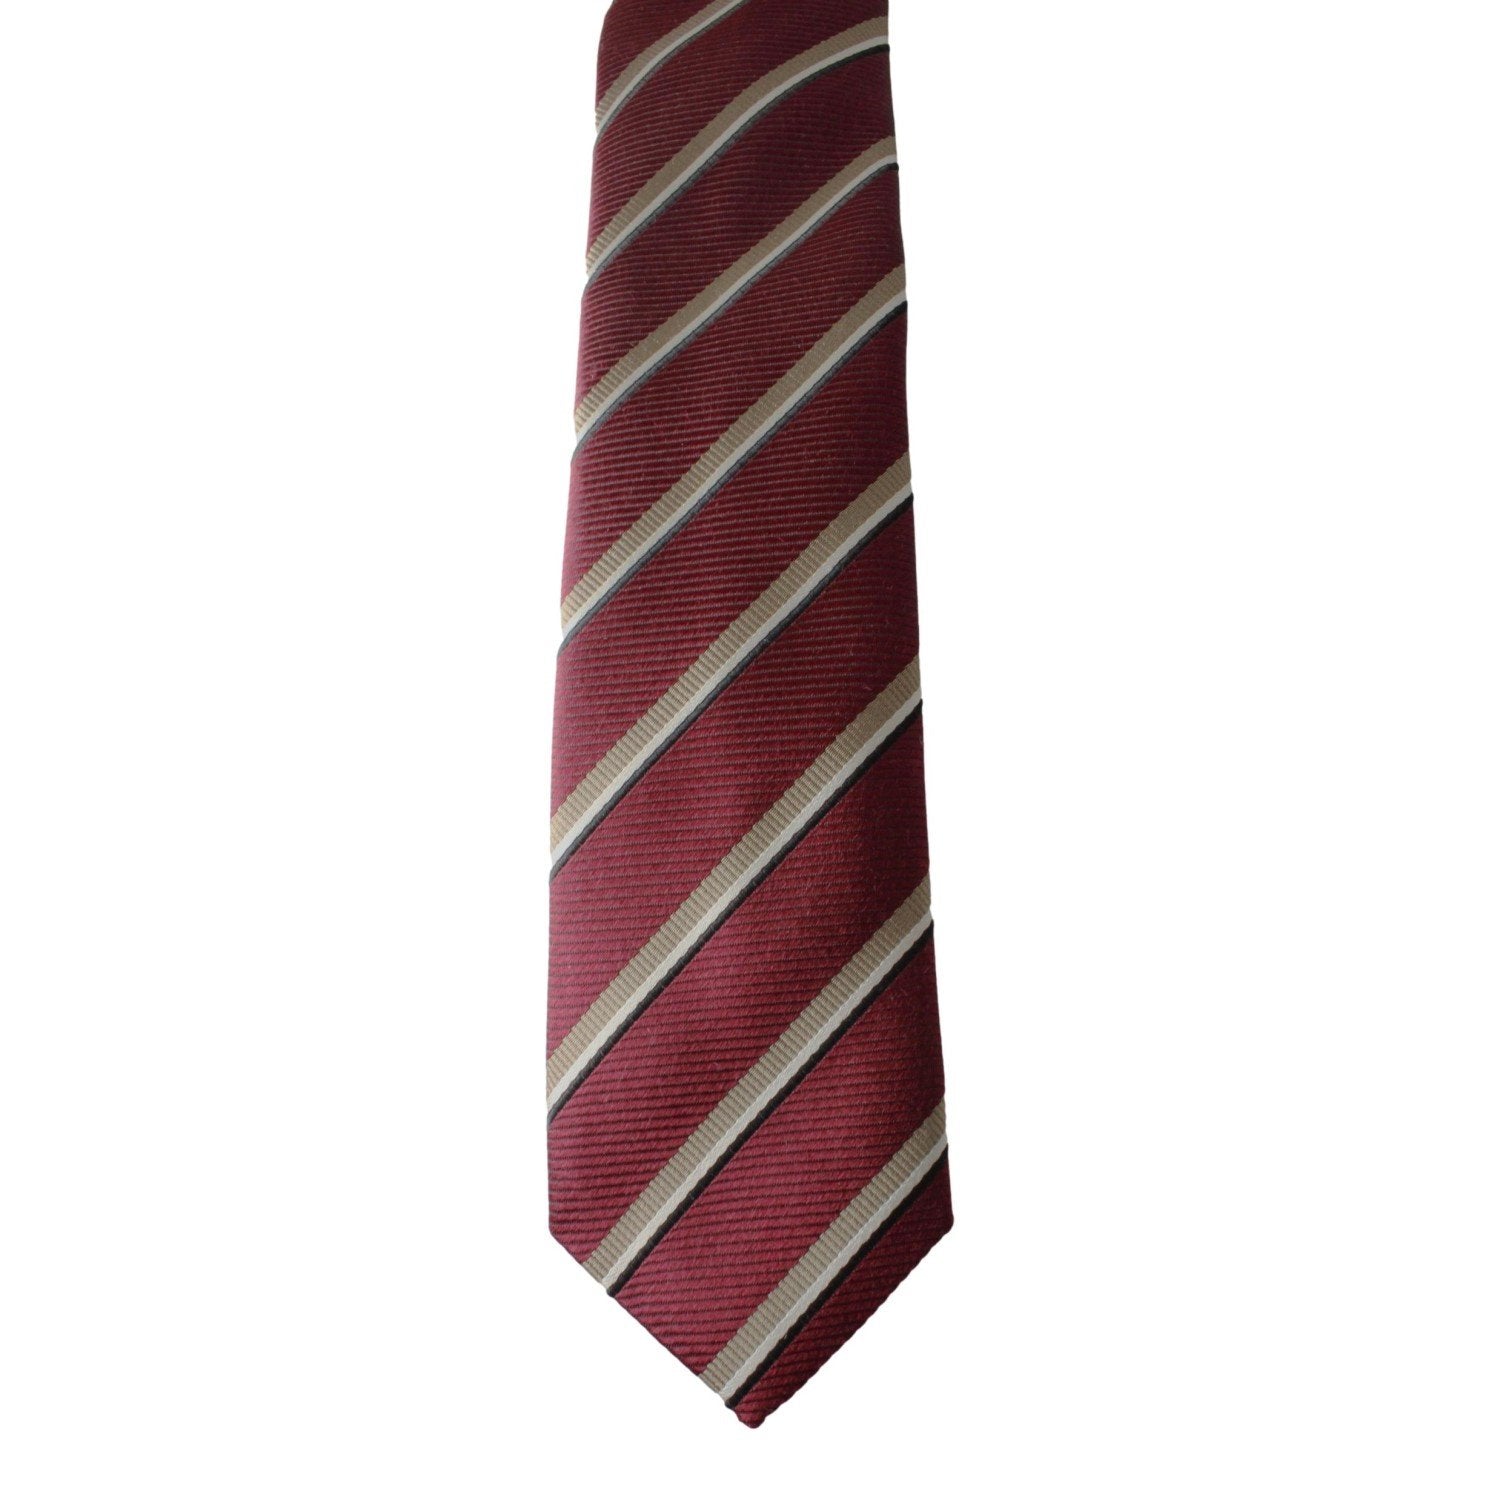 Prada Mens Silk Tie Bordeaux Red Striped Pattern UCR75 at_Queen_Bee_of_Beverly_Hills